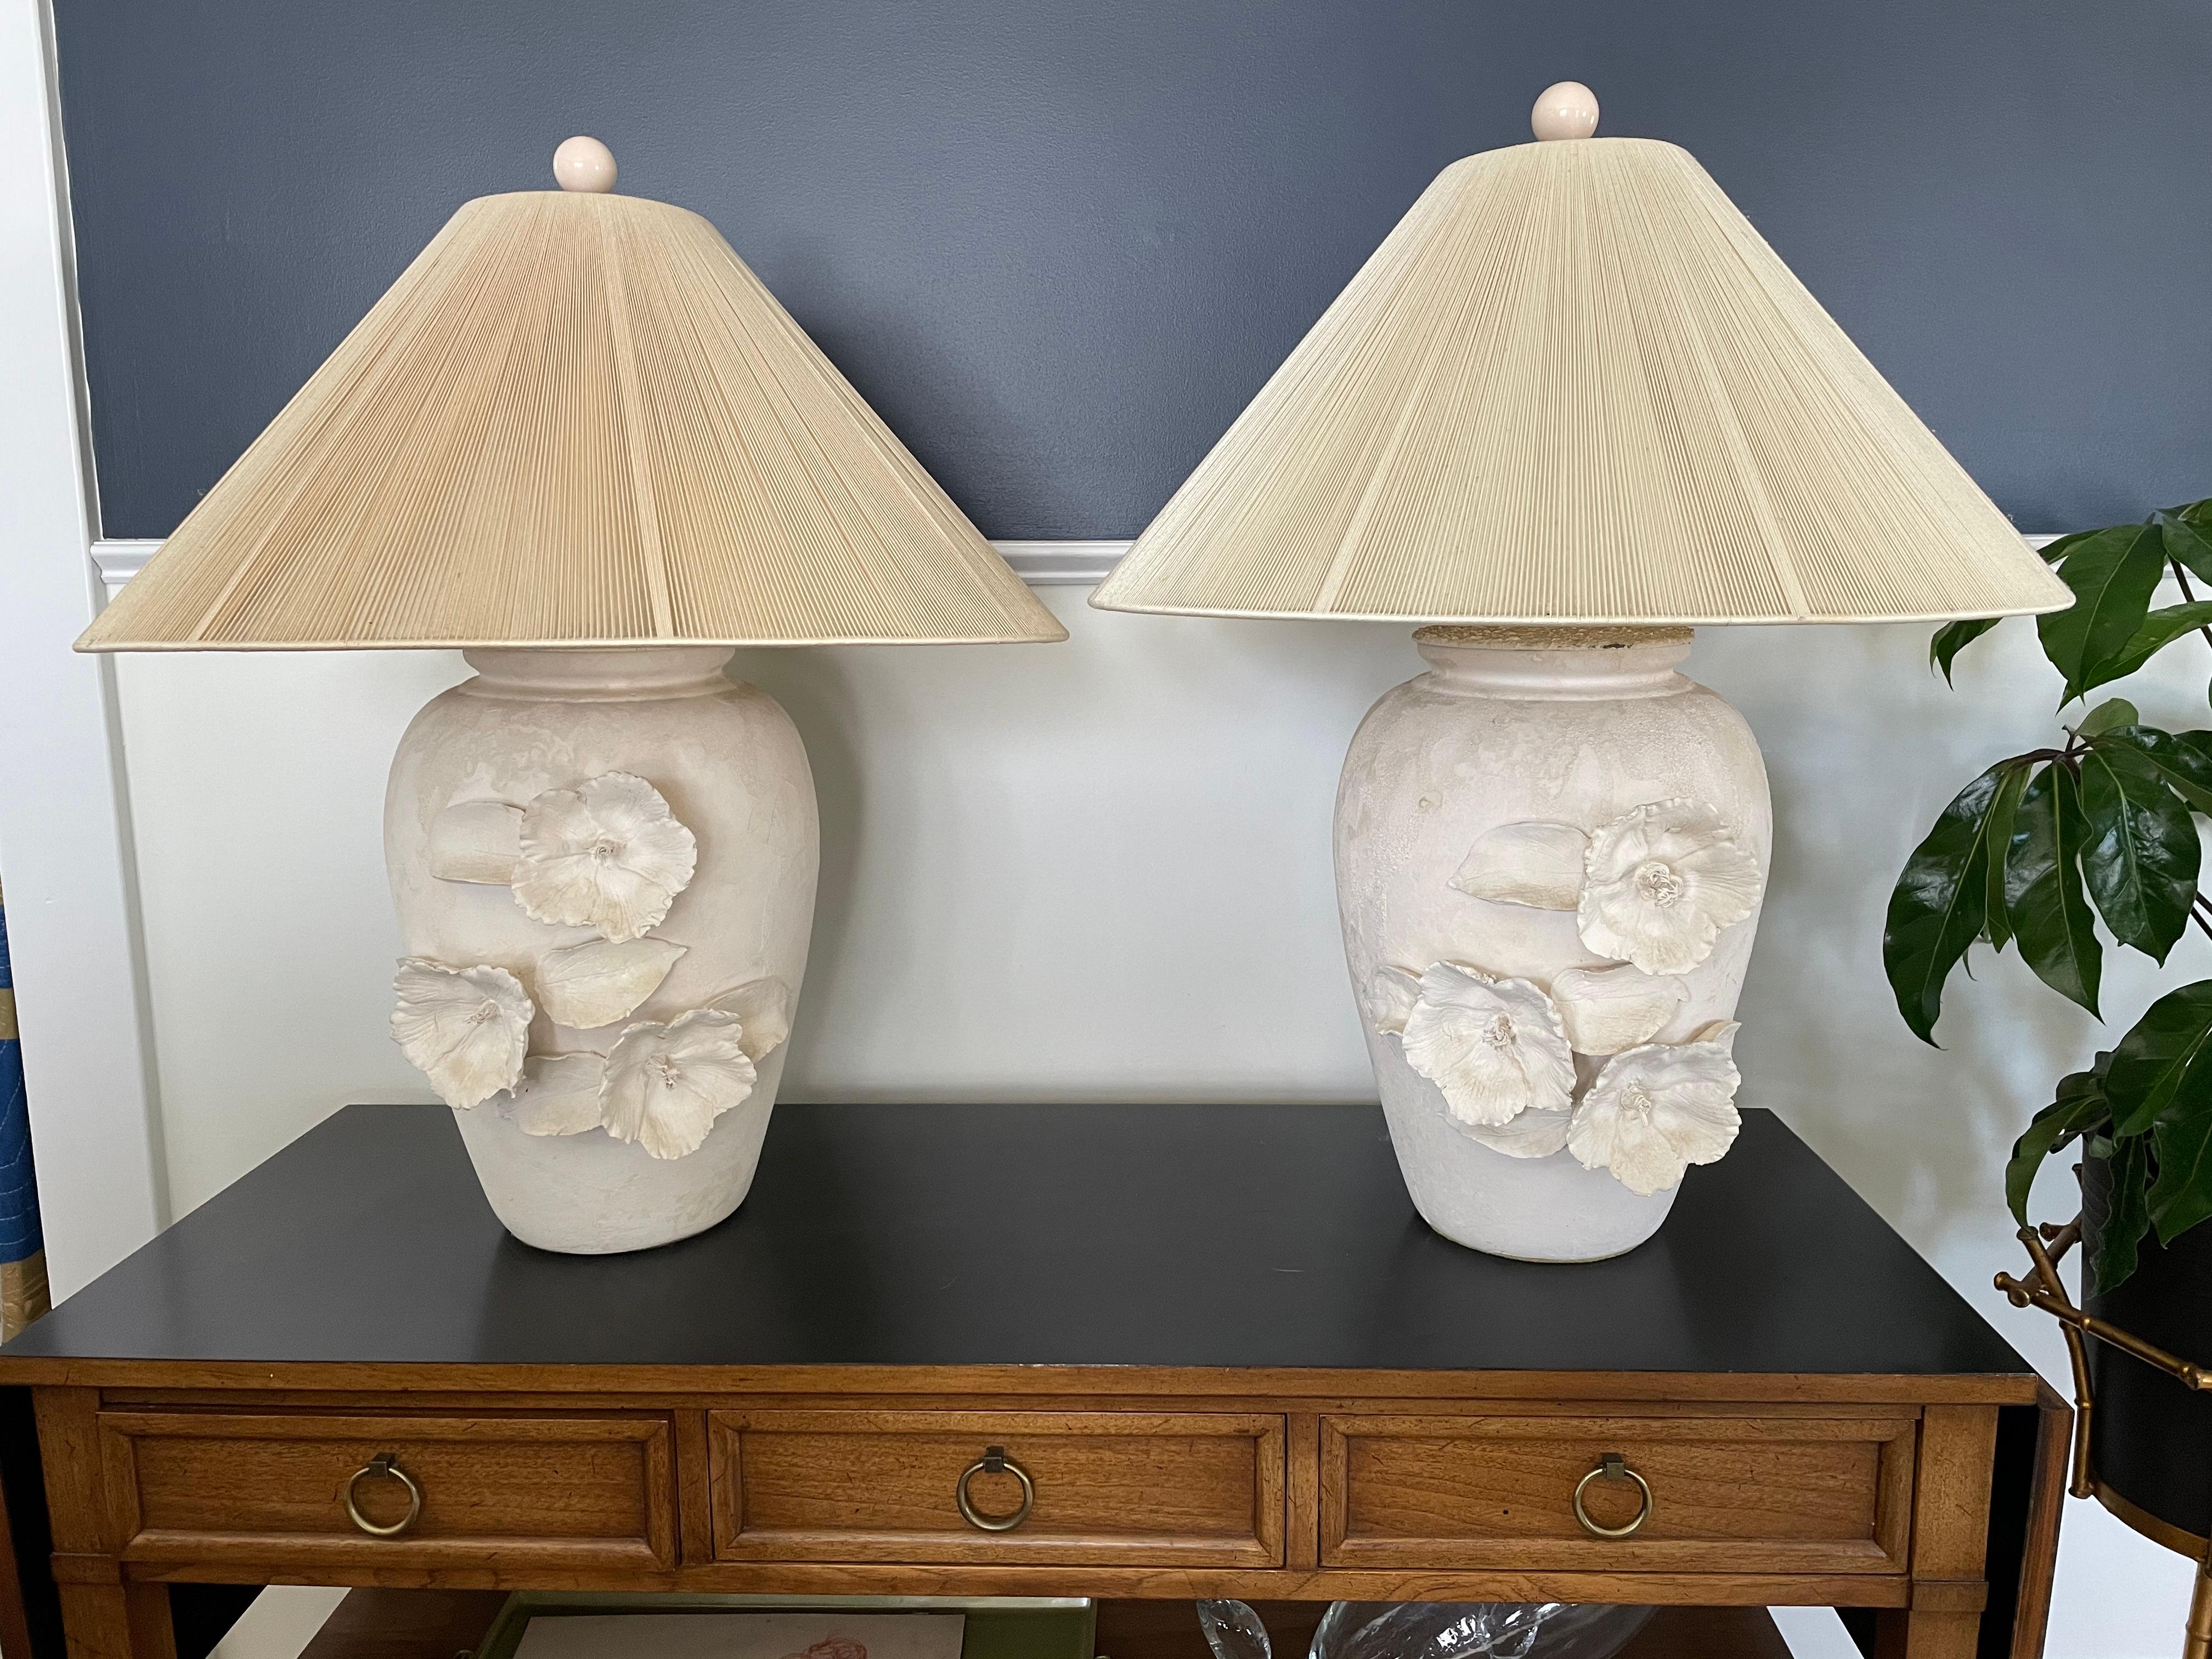 Spectacular pair of plaster lamps with such intricate floral reliefs. Delicate yet imposing. The flower anatomy draws you into the detail and artistry. Handmade Hilo Steiner string shades.
Curbside to NYC/Philly $300